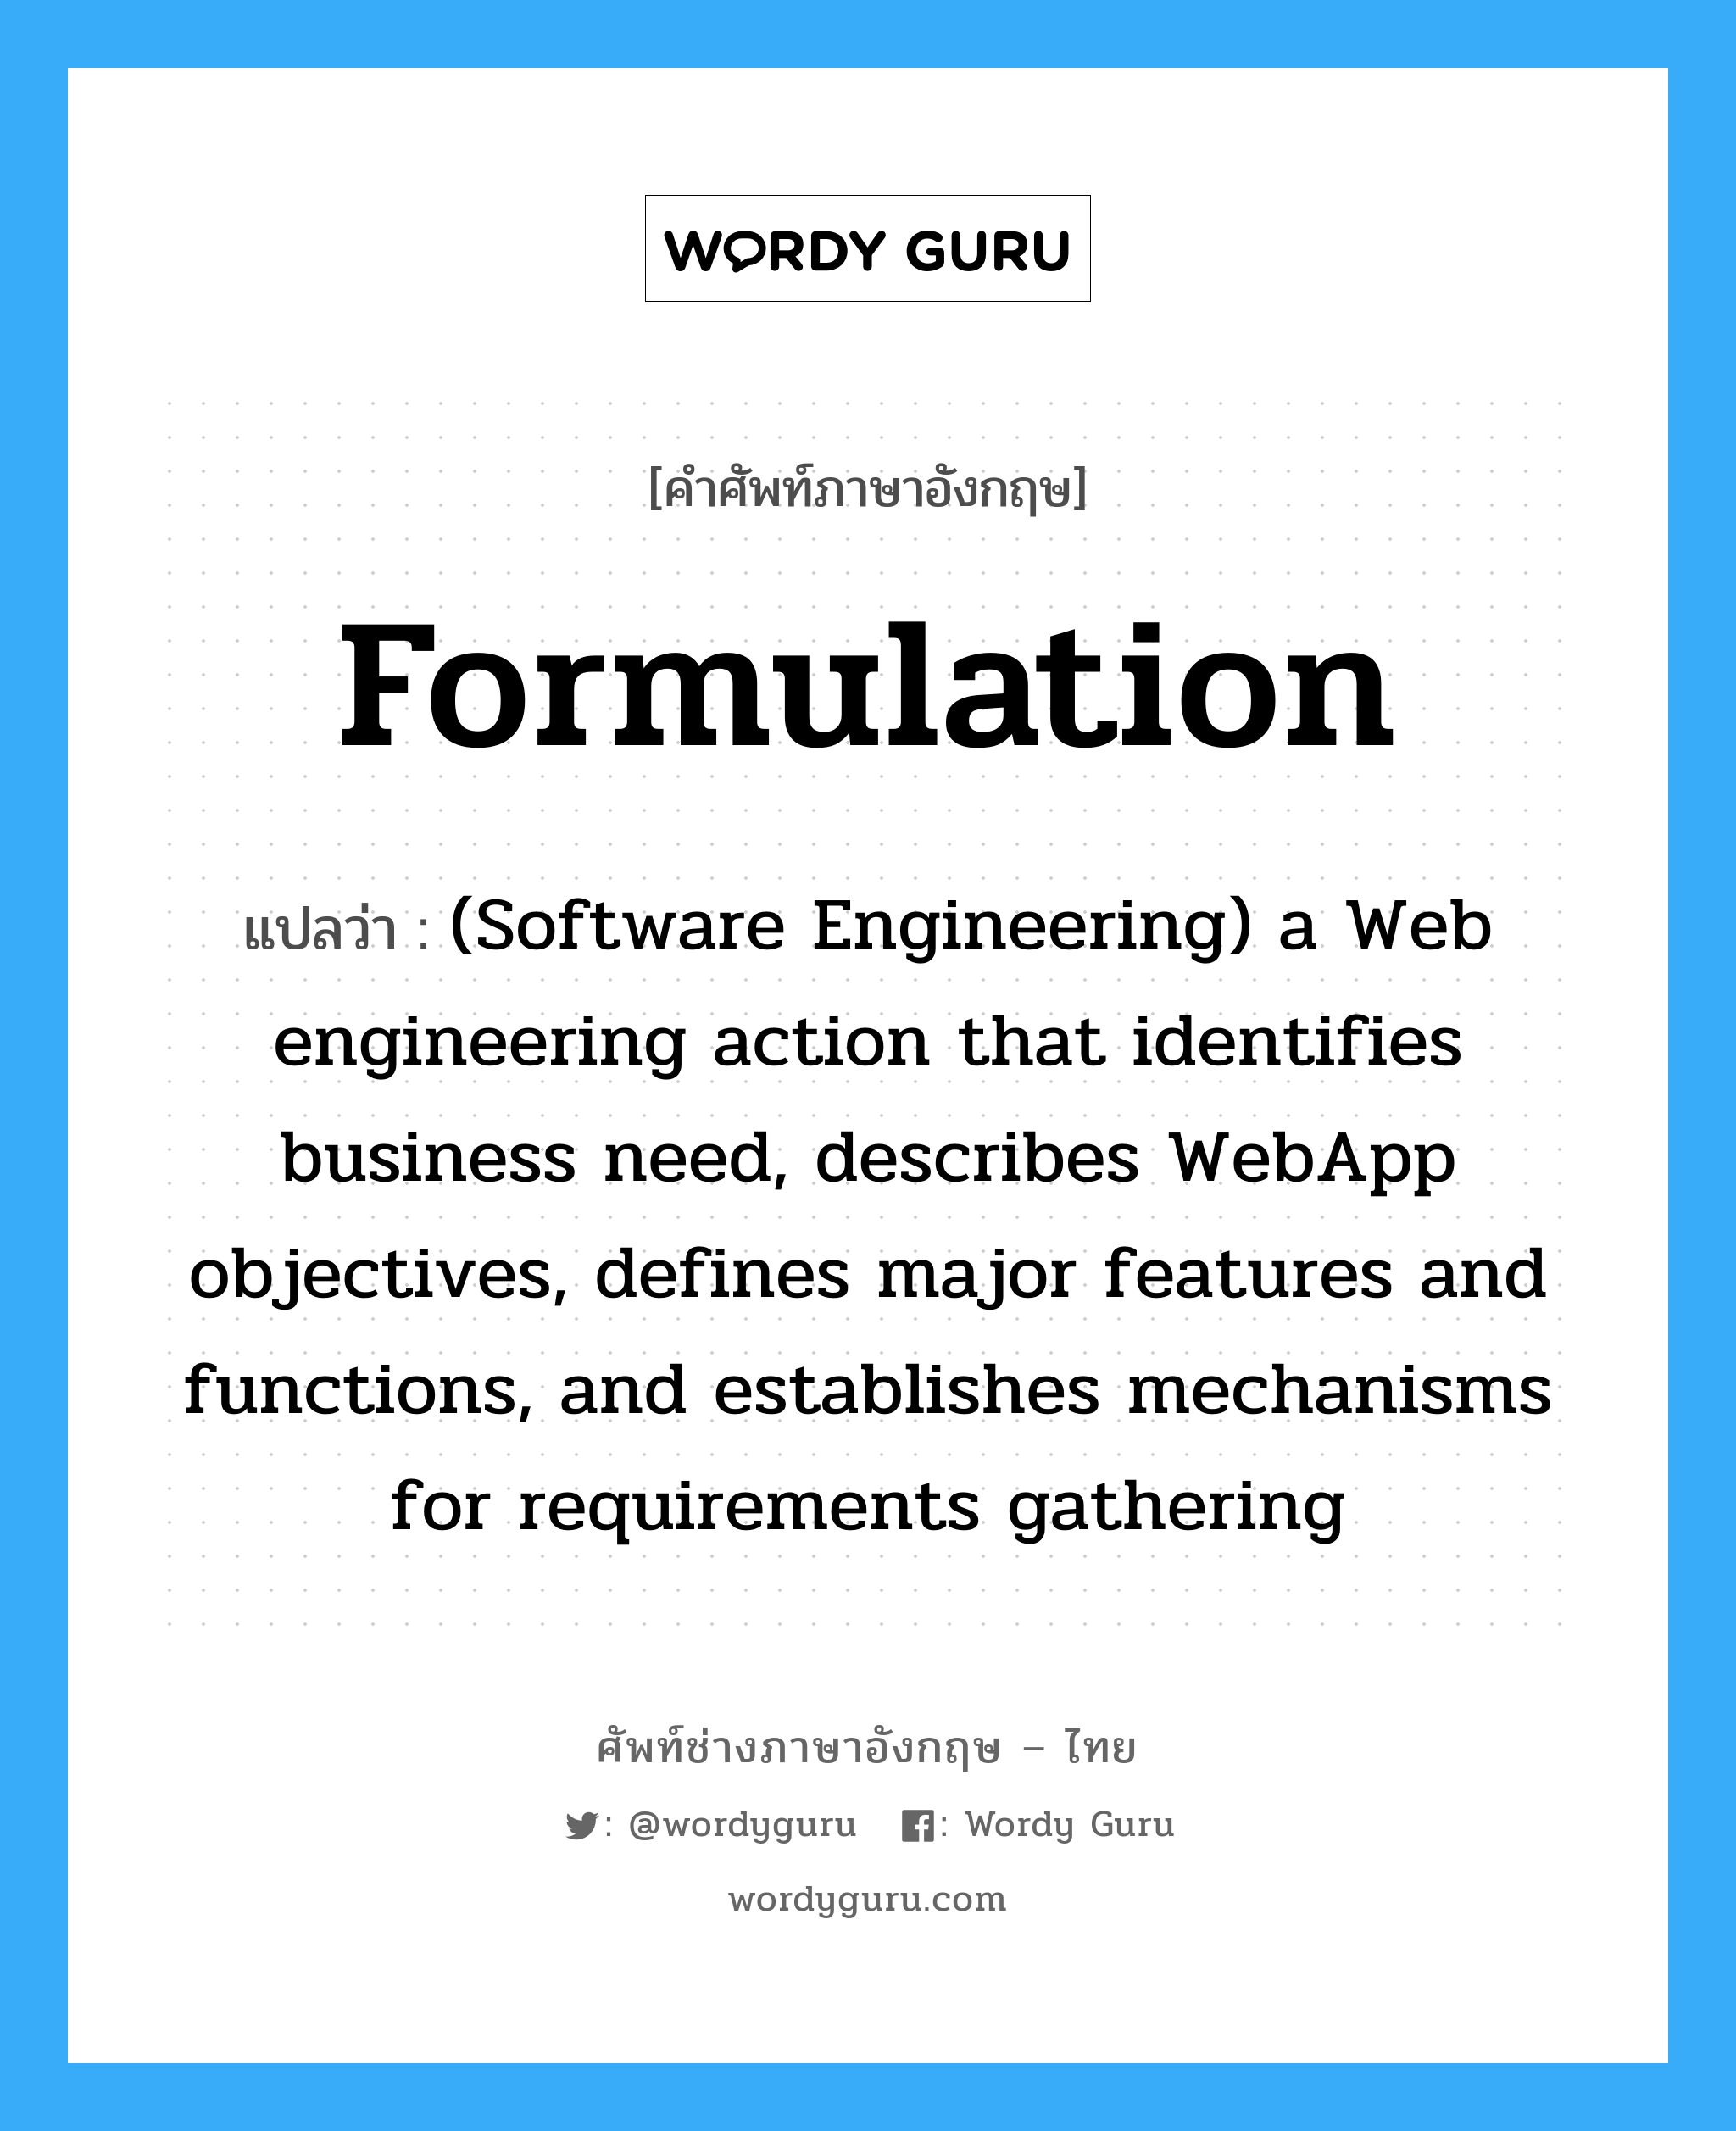 (Software Engineering) a Web engineering action that focuses on the aesthetics (e.g., the artistic elements) of a WebApp (often encompasses graphic design) ภาษาอังกฤษ?, คำศัพท์ช่างภาษาอังกฤษ - ไทย (Software Engineering) a Web engineering action that identifies business need, describes WebApp objectives, defines major features and functions, and establishes mechanisms for requirements gathering คำศัพท์ภาษาอังกฤษ (Software Engineering) a Web engineering action that identifies business need, describes WebApp objectives, defines major features and functions, and establishes mechanisms for requirements gathering แปลว่า Formulation